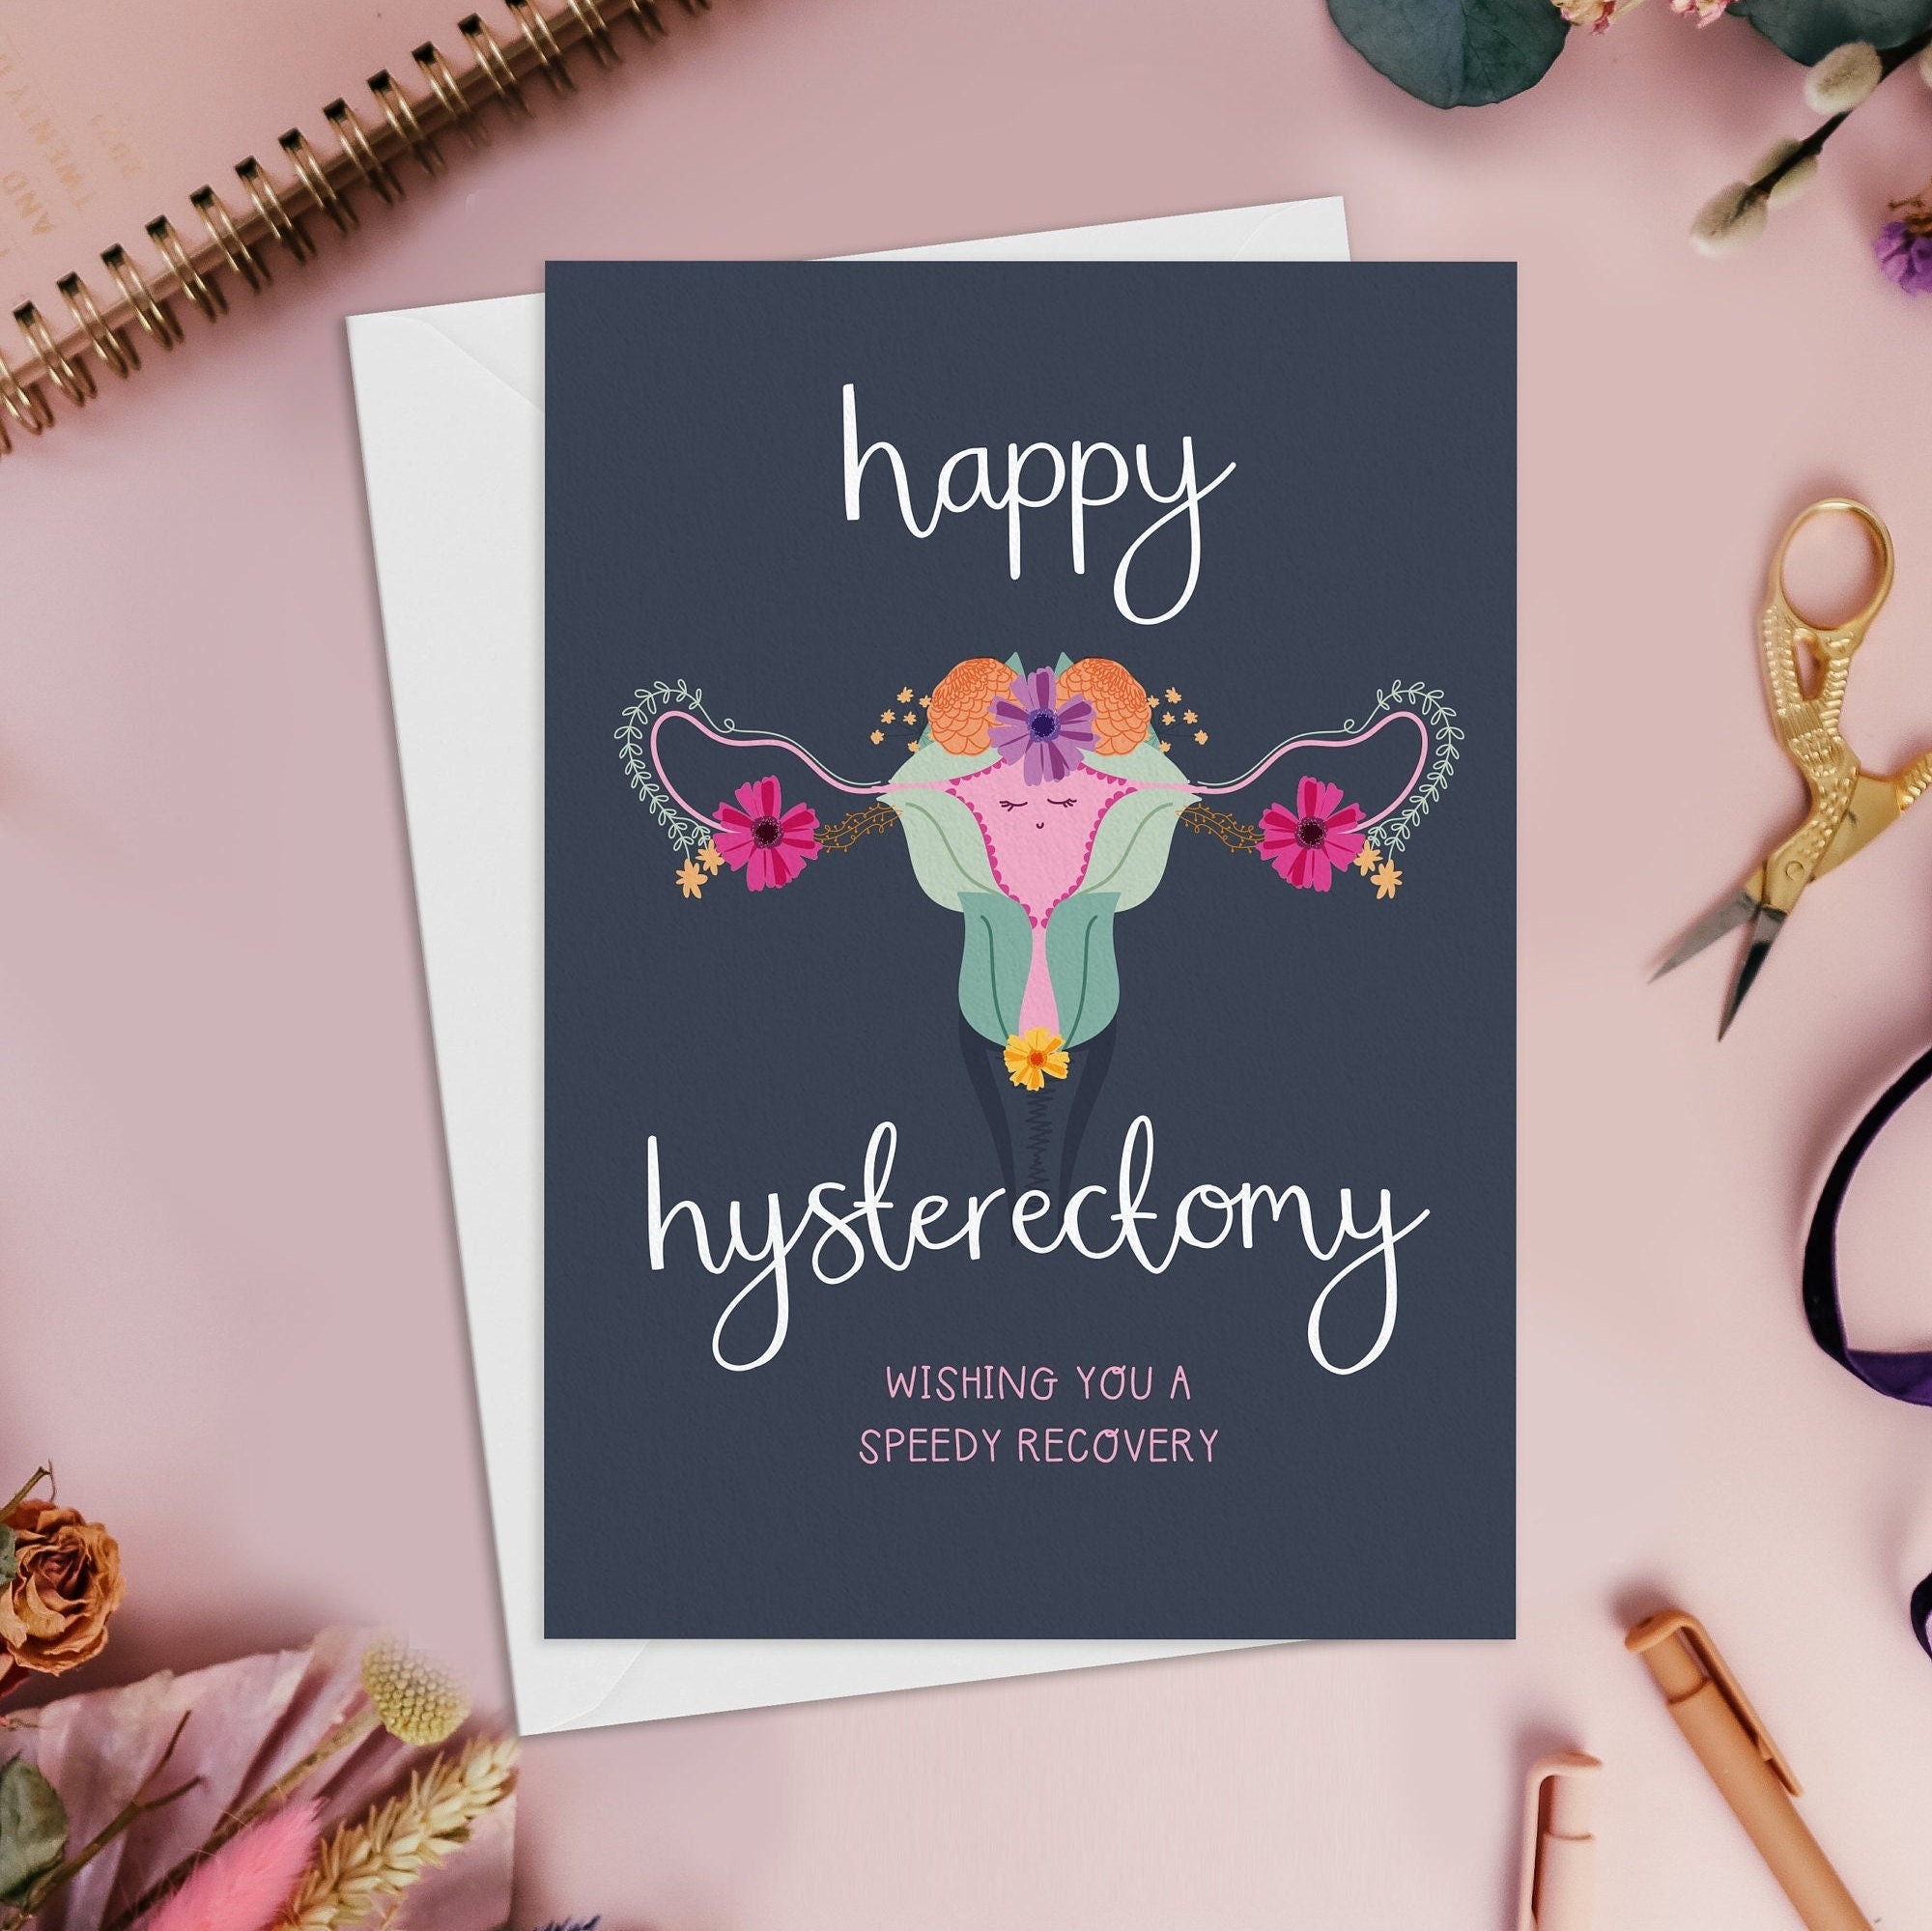 Hysterectomy Recovery Must Haves - My Kind of Sweet